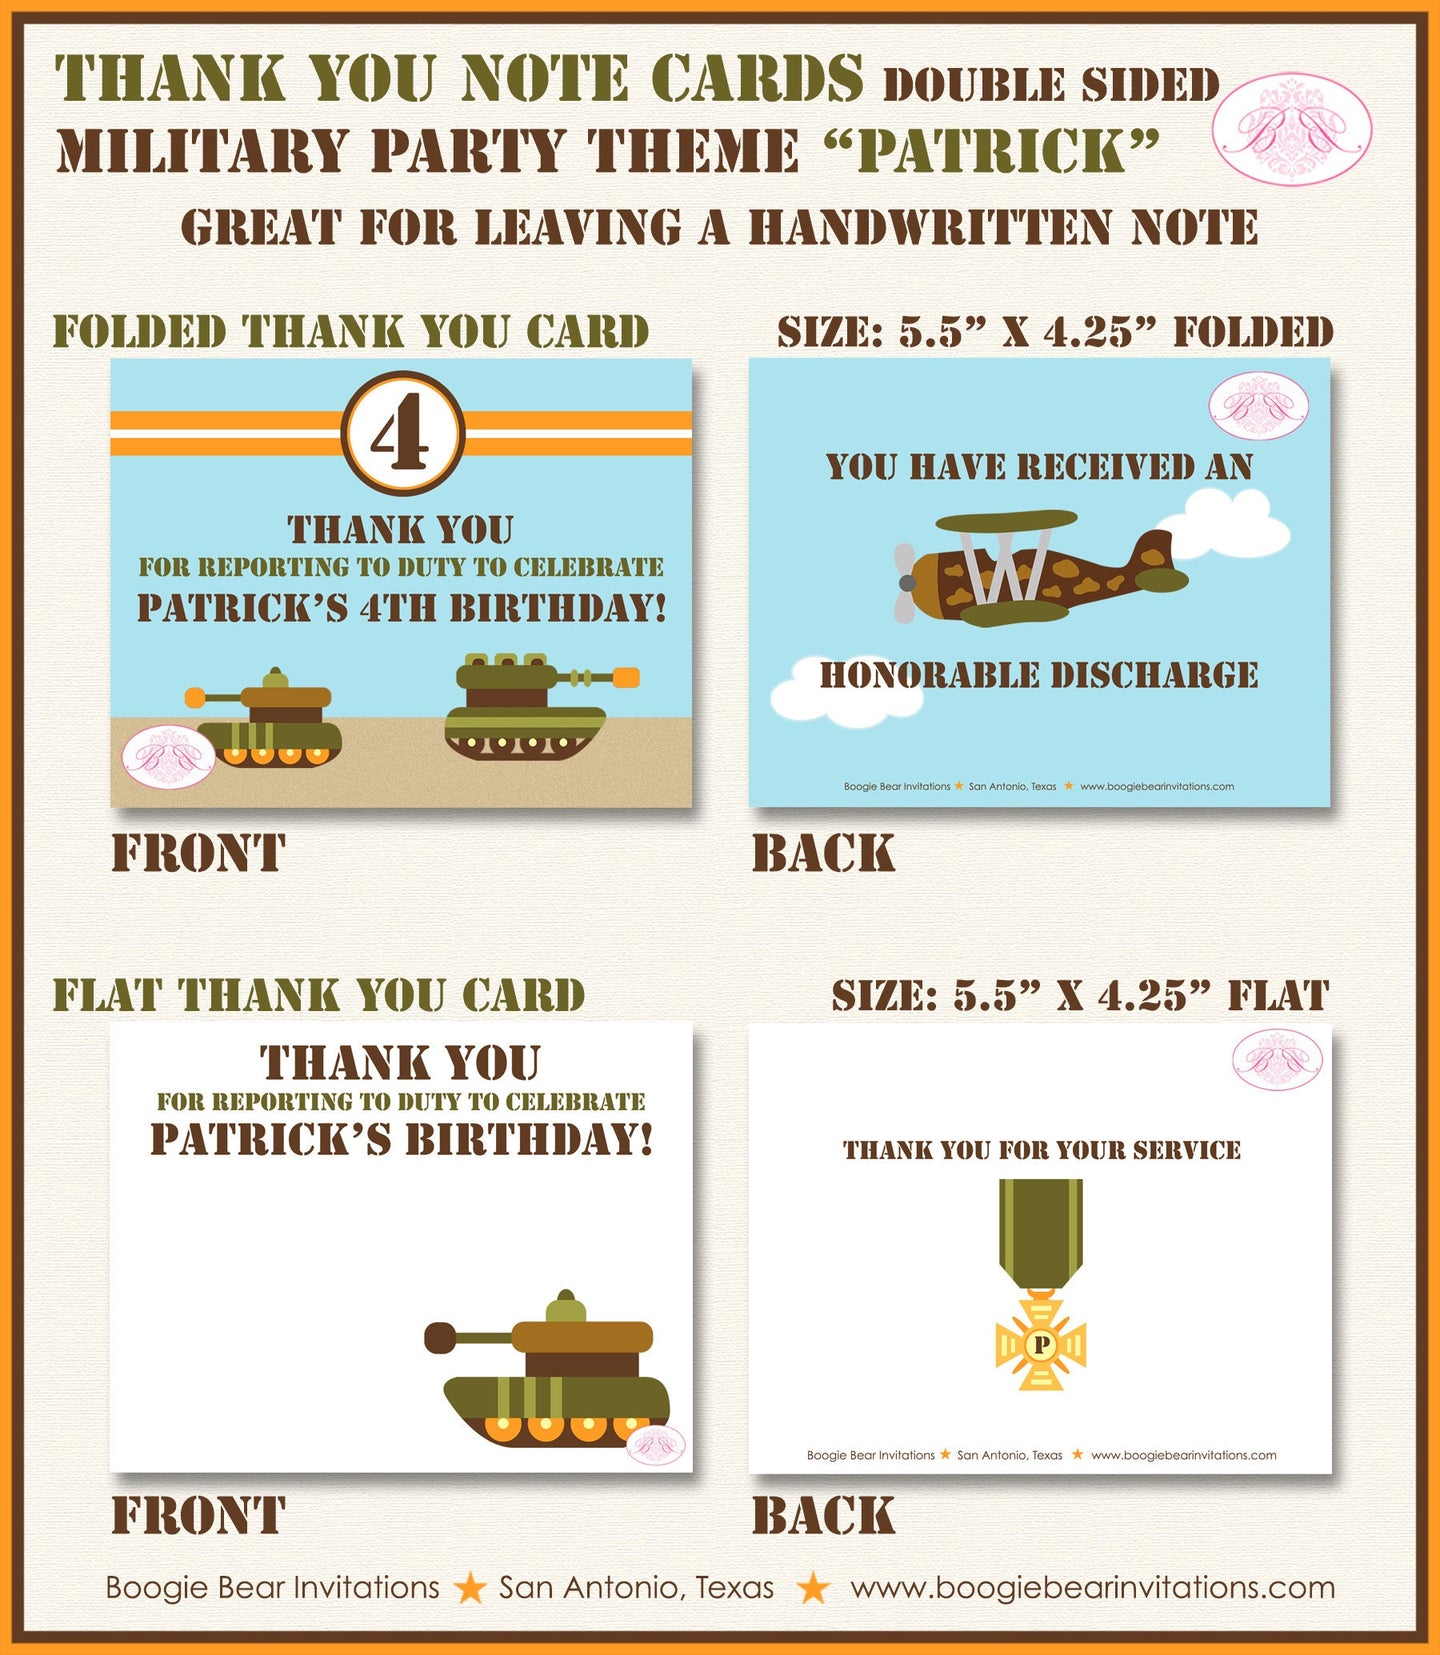 Military Birthday Party Thank You Card Army Navy Air Force Marines Camo Green Tank Active Duty Boogie Bear Invitations Patrick Theme Printed